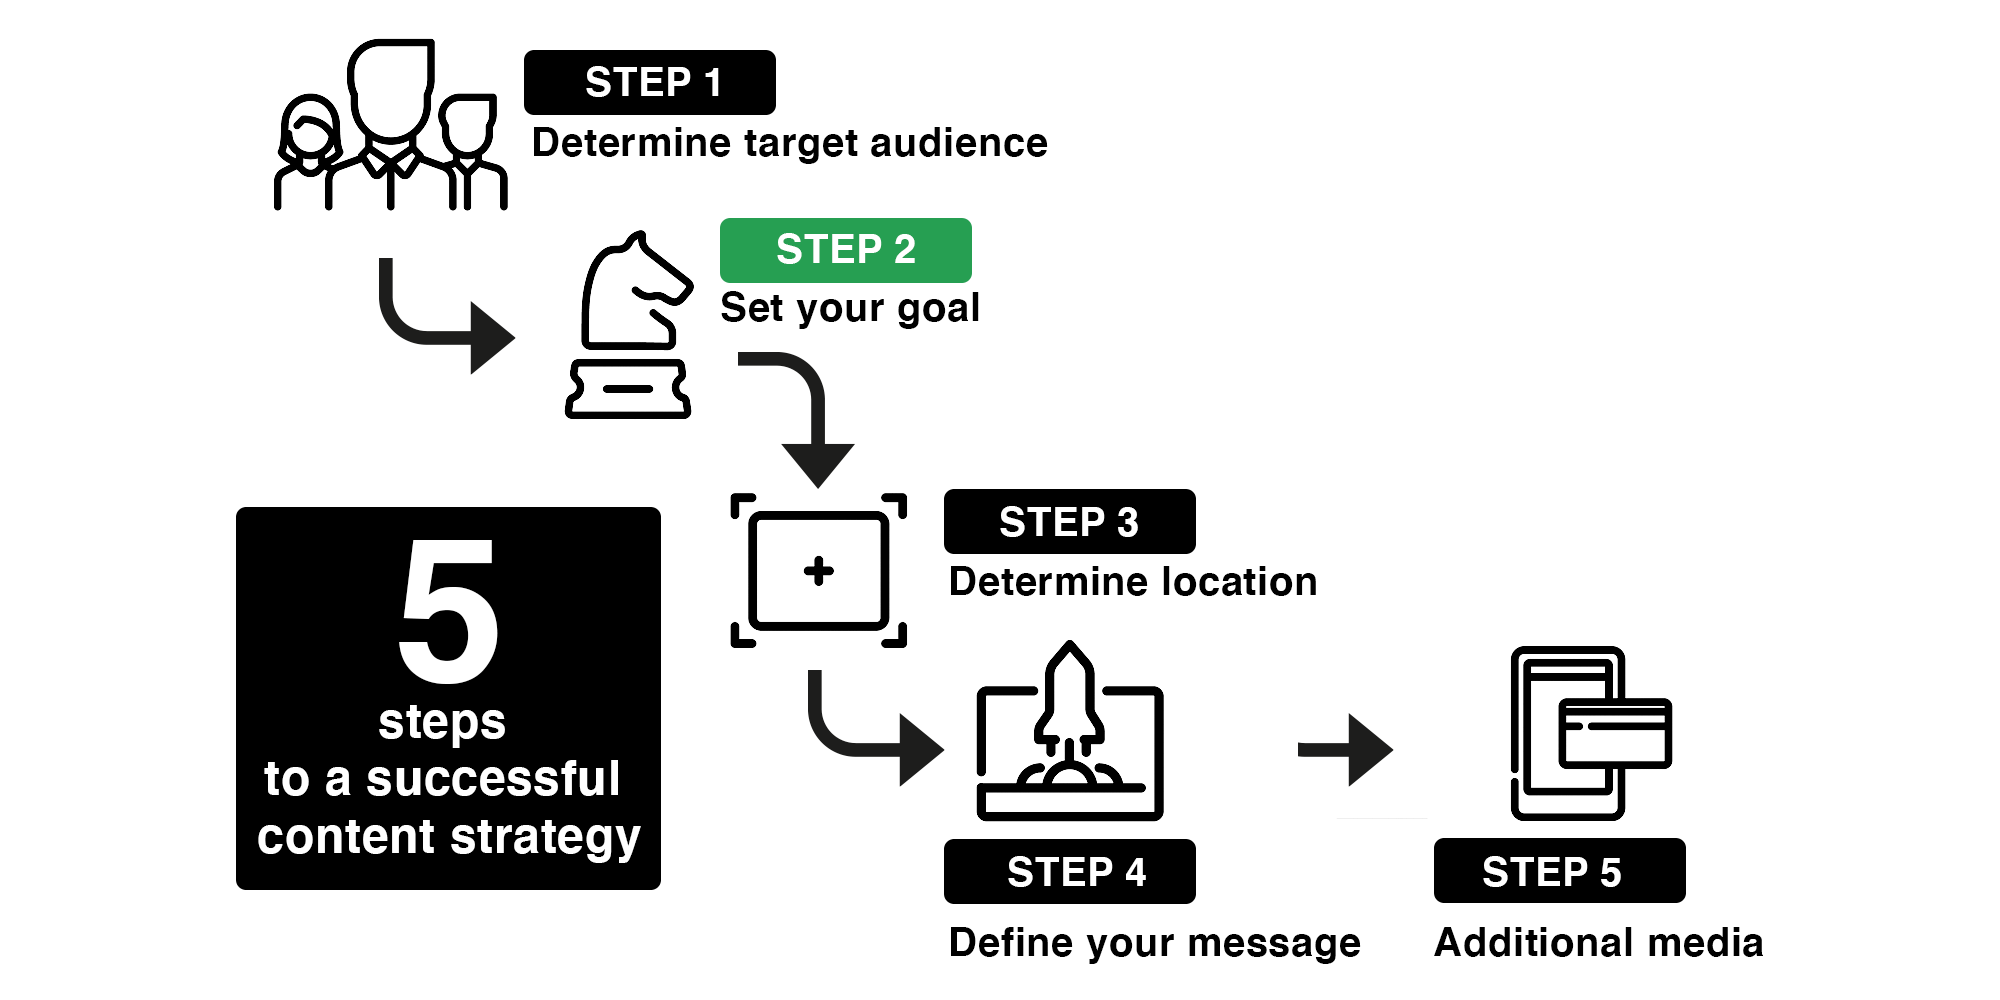 Step 2 of creating a Content Strategy in 5 steps